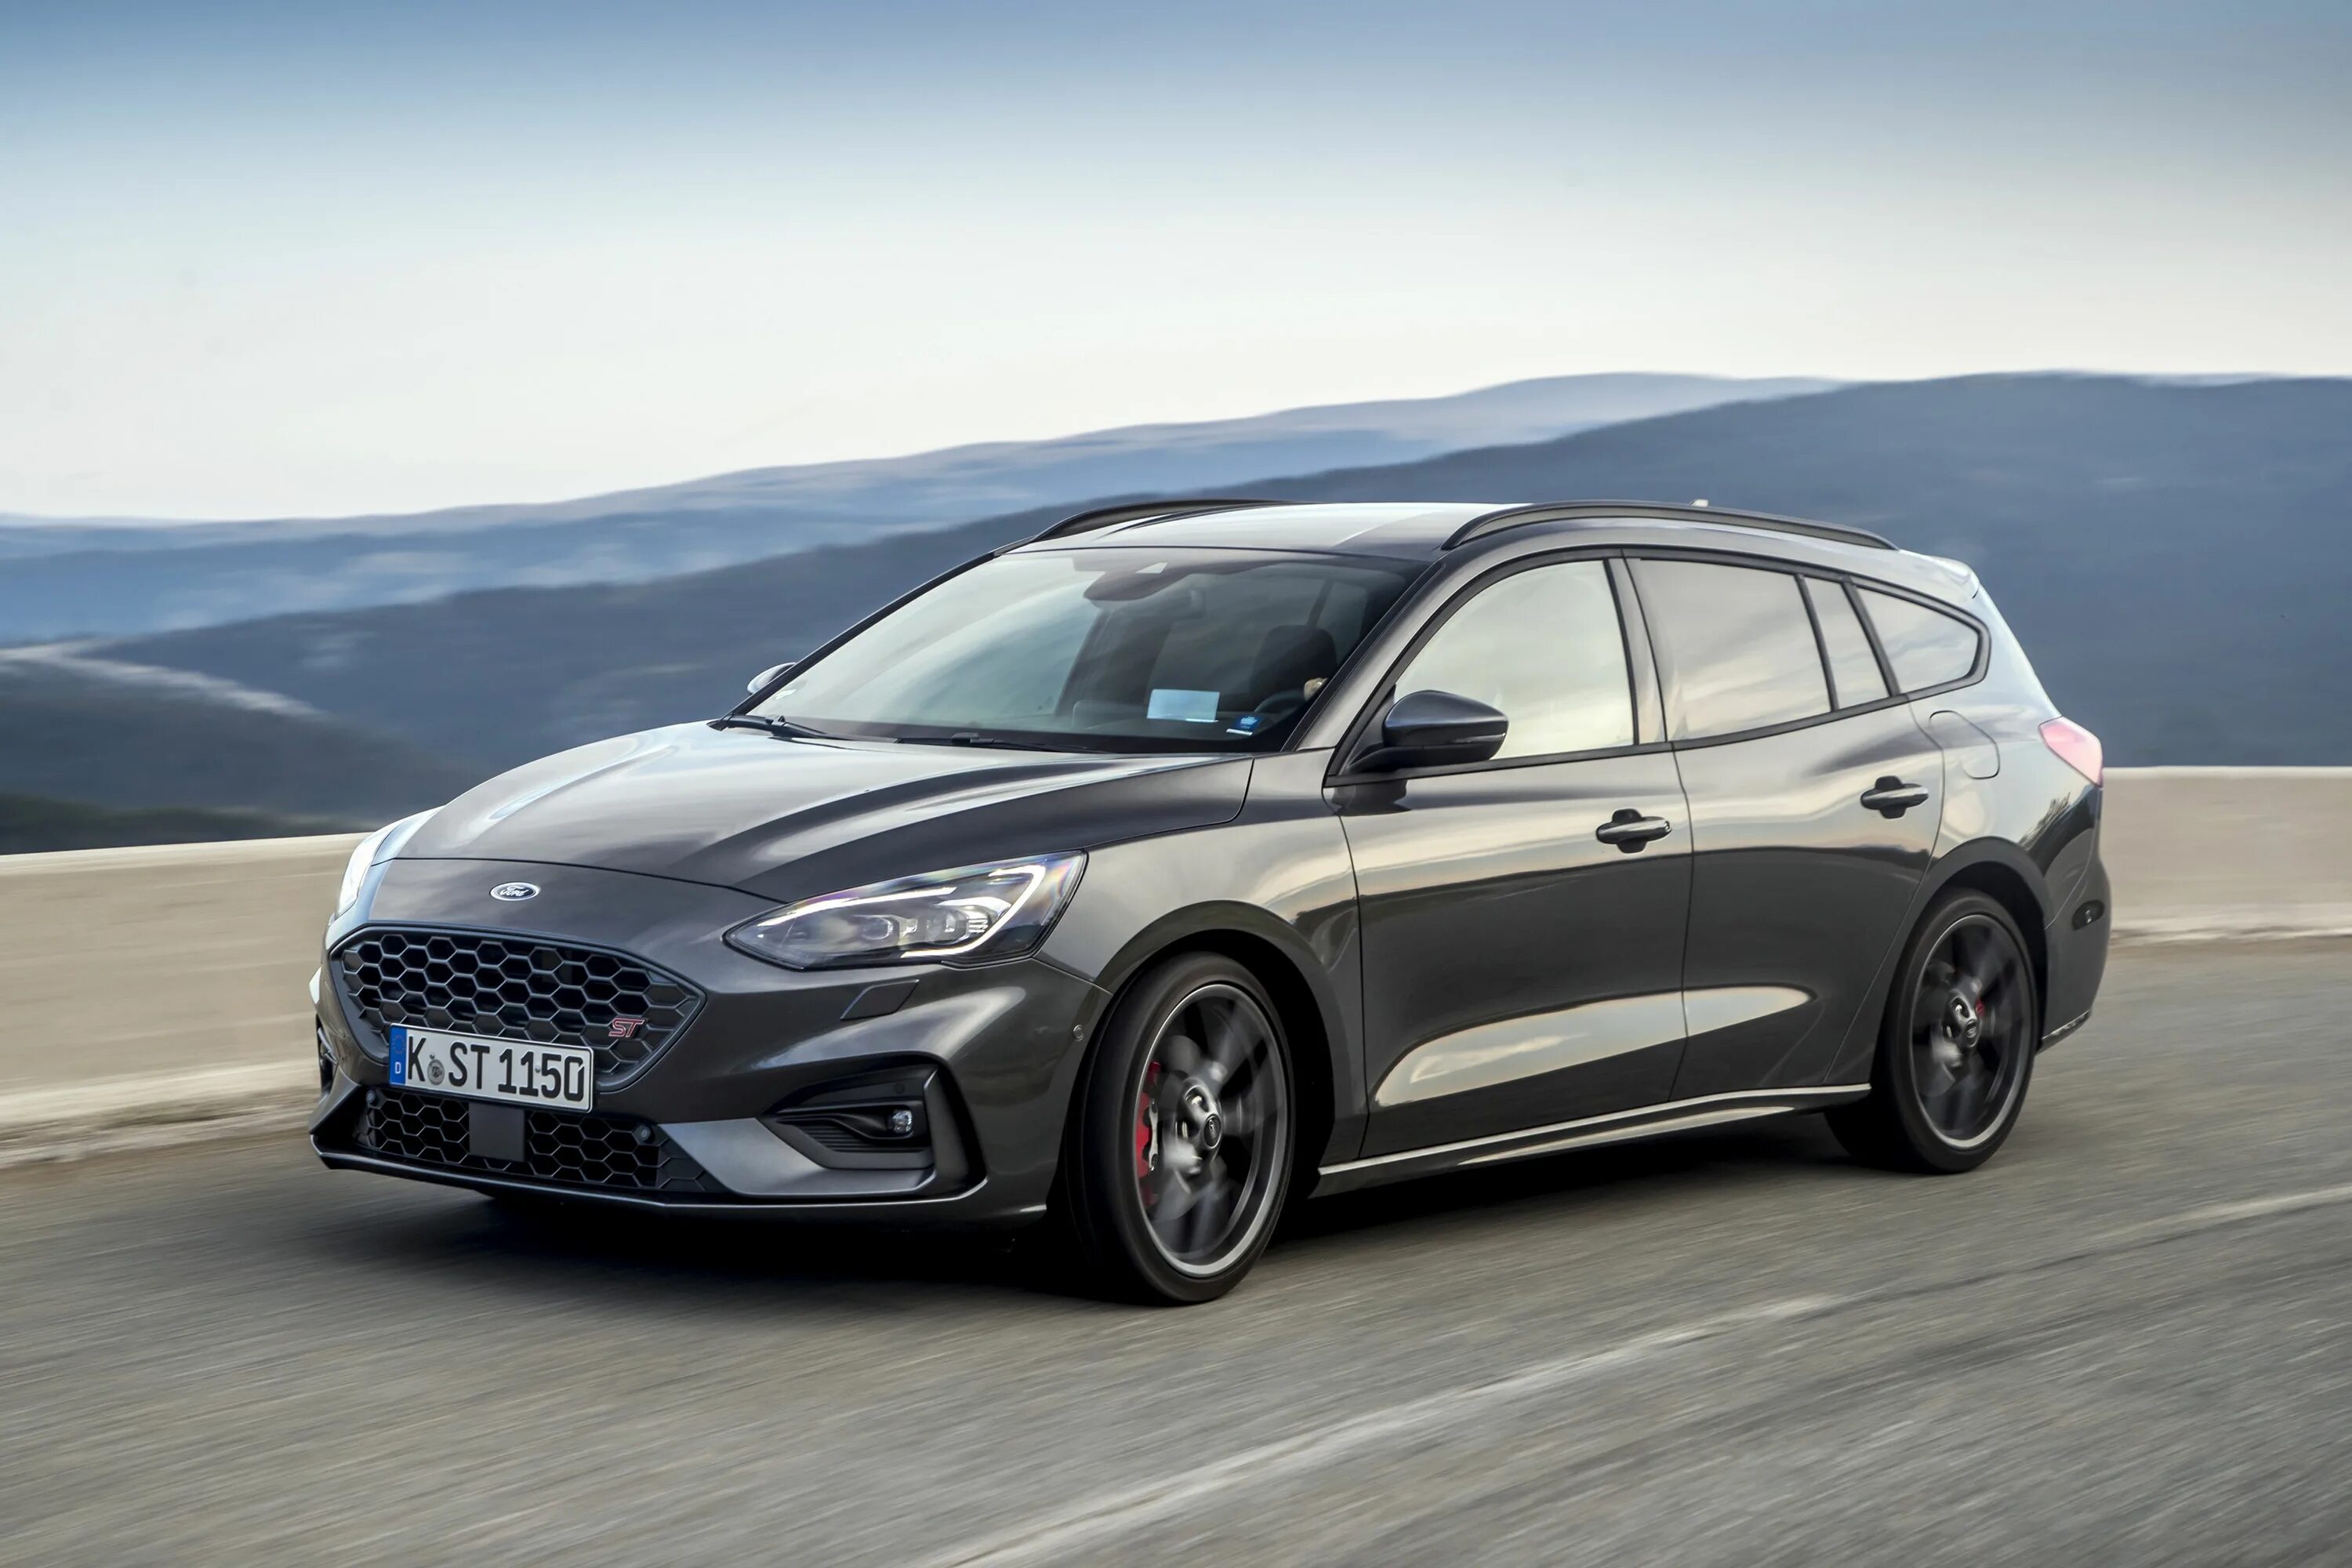 Ford Focus Wagon 2020. Ford Focus St Wagon 2020. Ford Focus Wagon 2019. Ford Focus St 2020. Форд универсал 2019